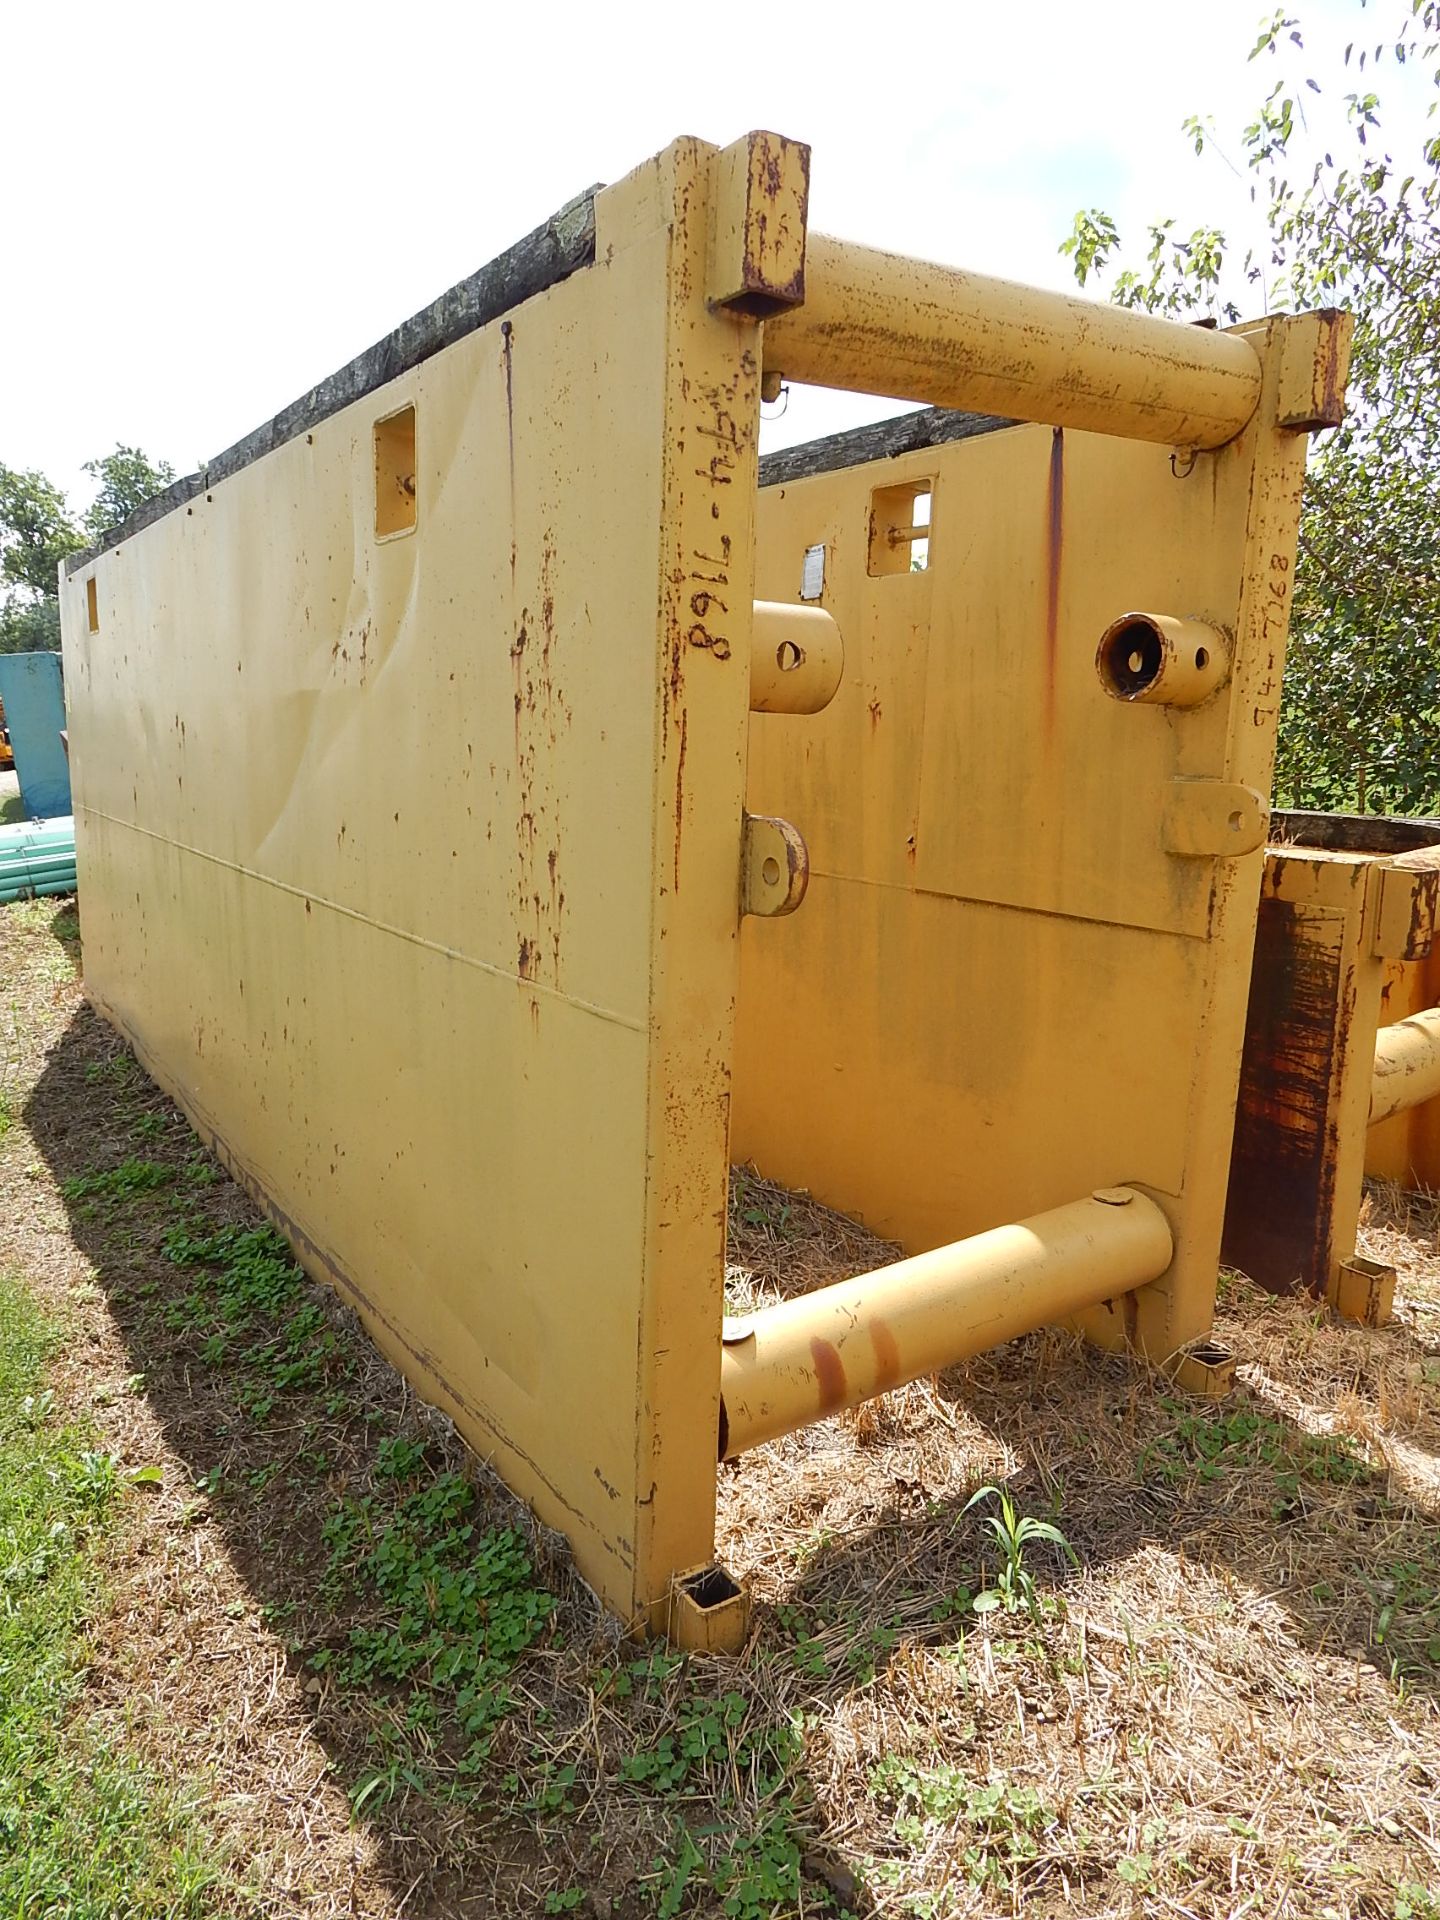 Shieldco Trenchbox Model 420R6, s/n 94-7168, 8 ft High x 20 ft Long x 6 in Thick w/48" Spreader